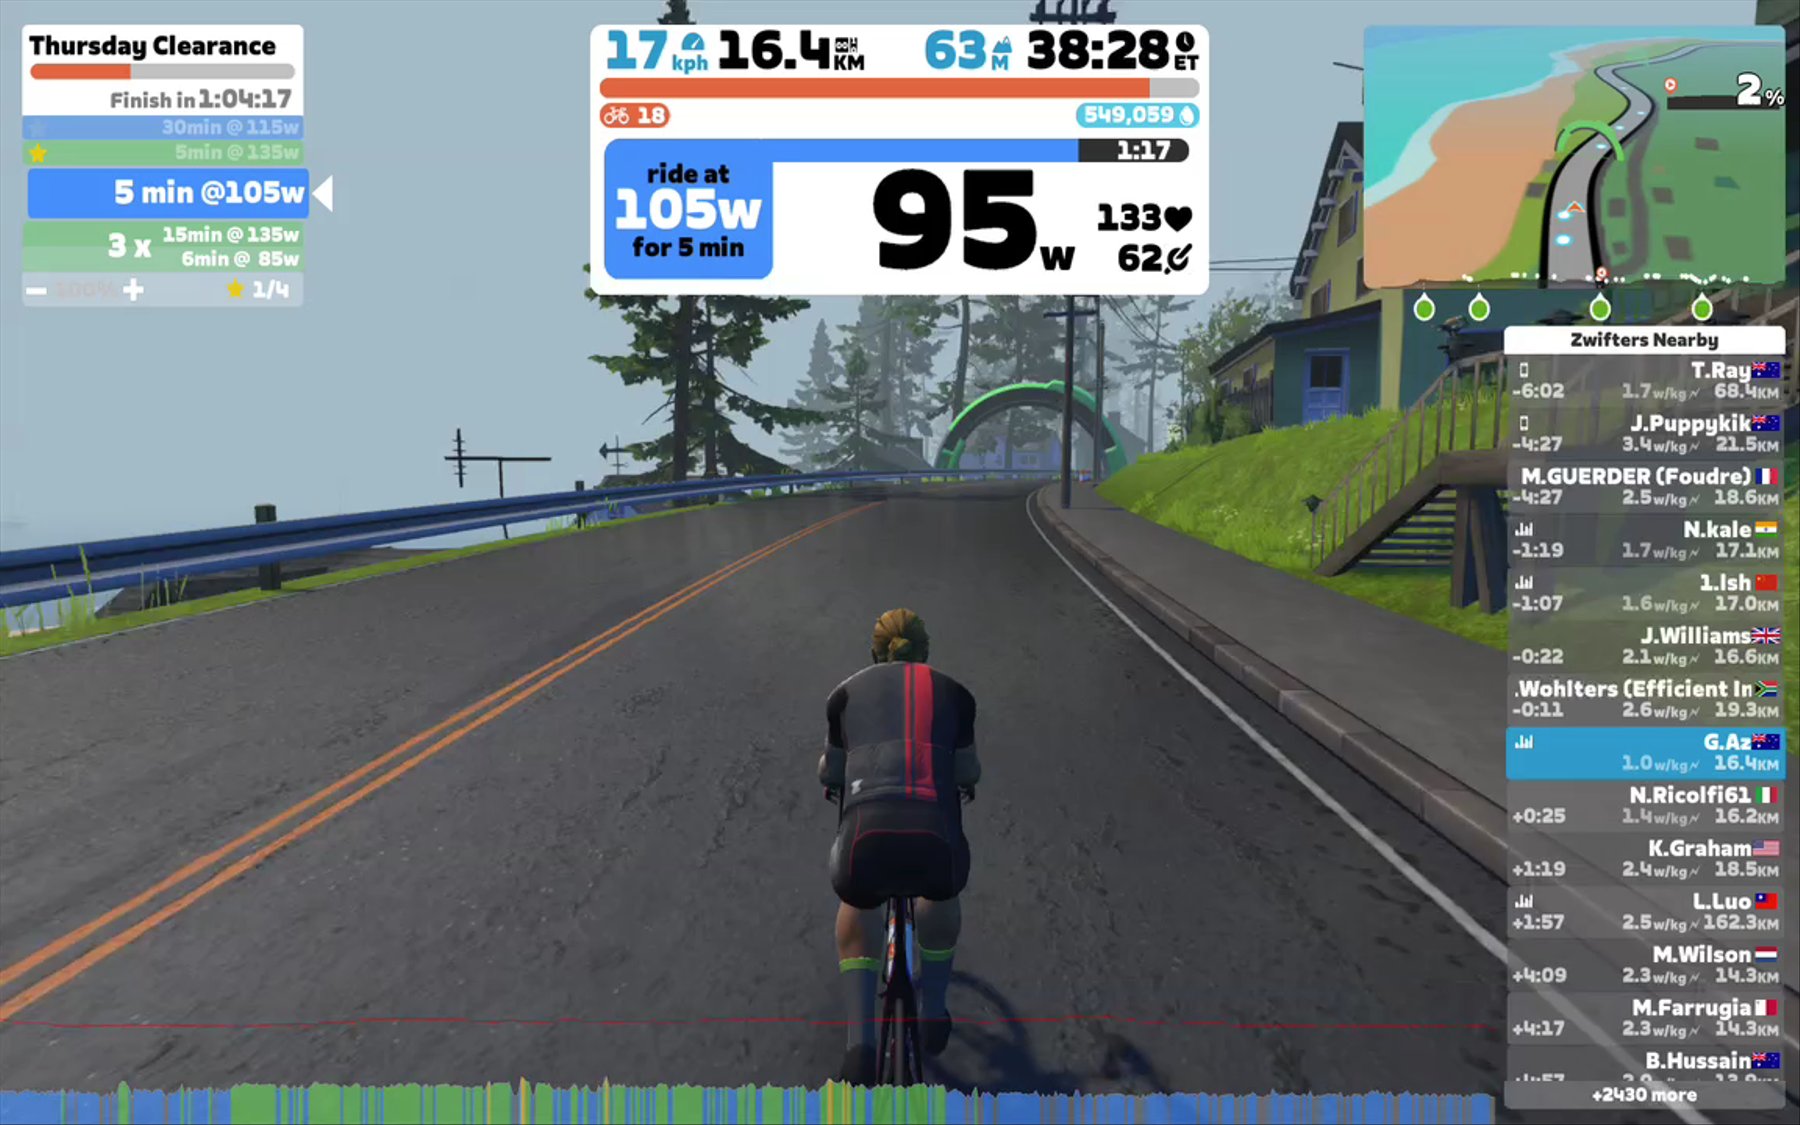 Zwift - Thursday Clearance in Watopia